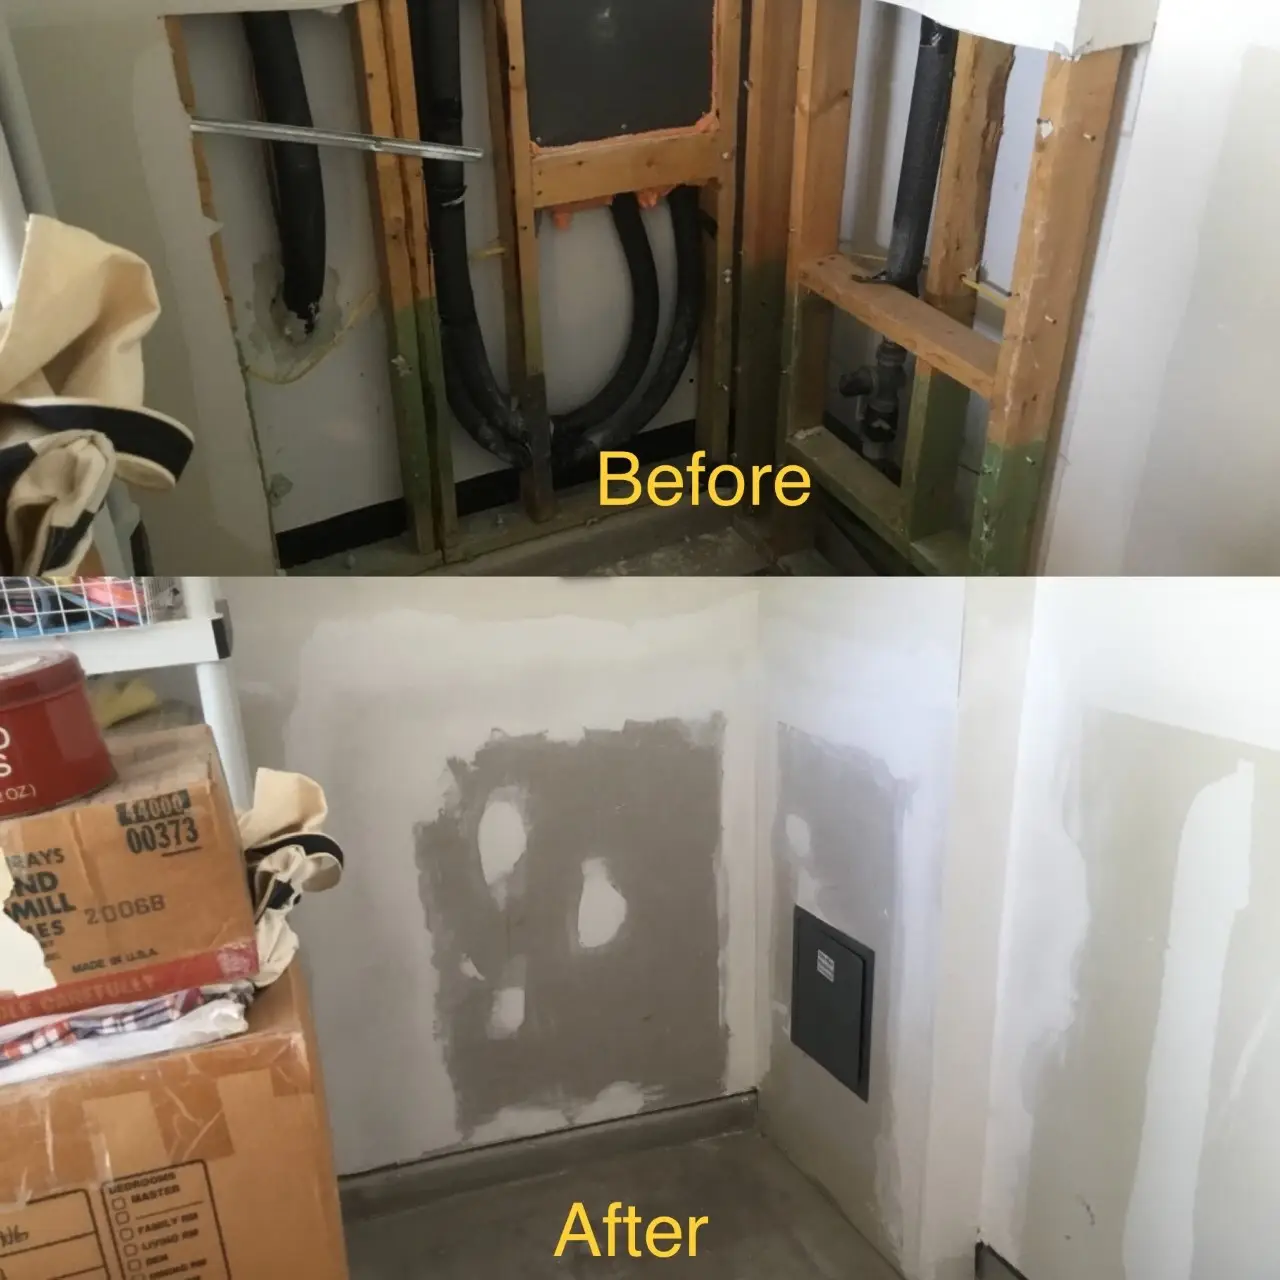 The corner section of a wall in a home before and after drywall has been installed along with a metal access panel by Mr. Handyman.